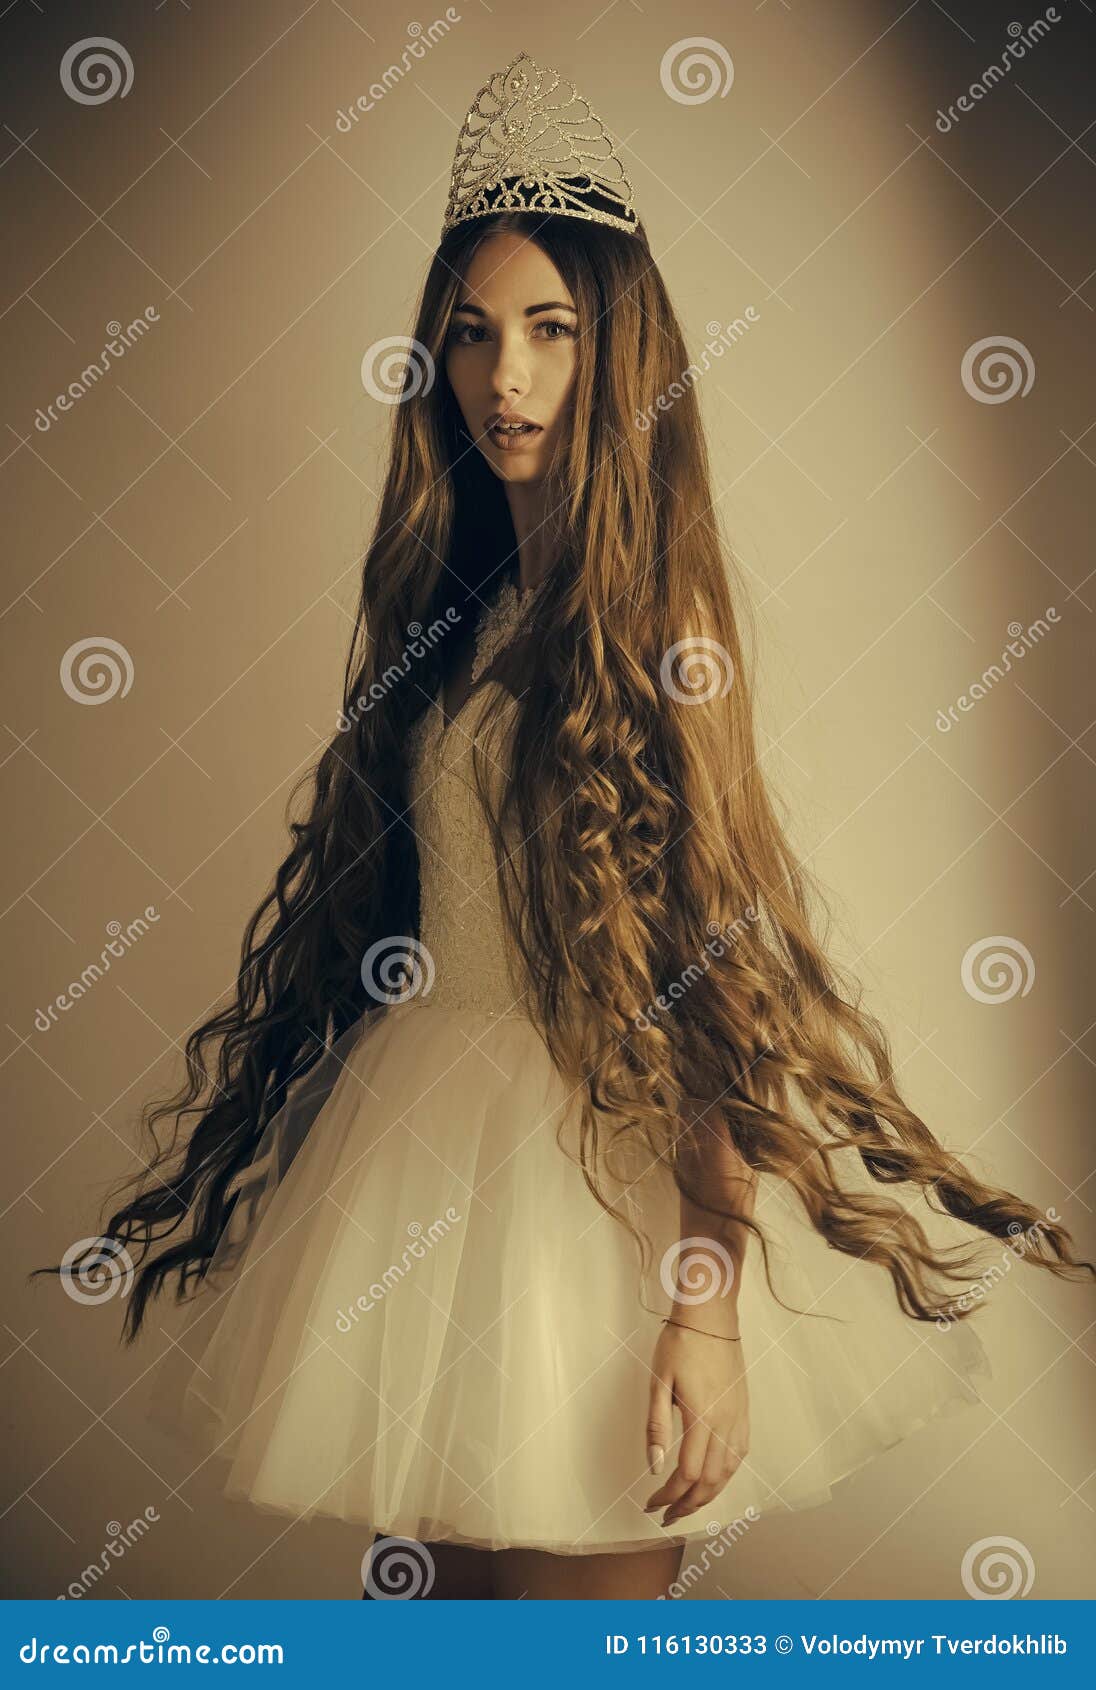 Woman with Long Hair White Dress and Crown. Stock Image - Image of hairy,  lady: 116130333